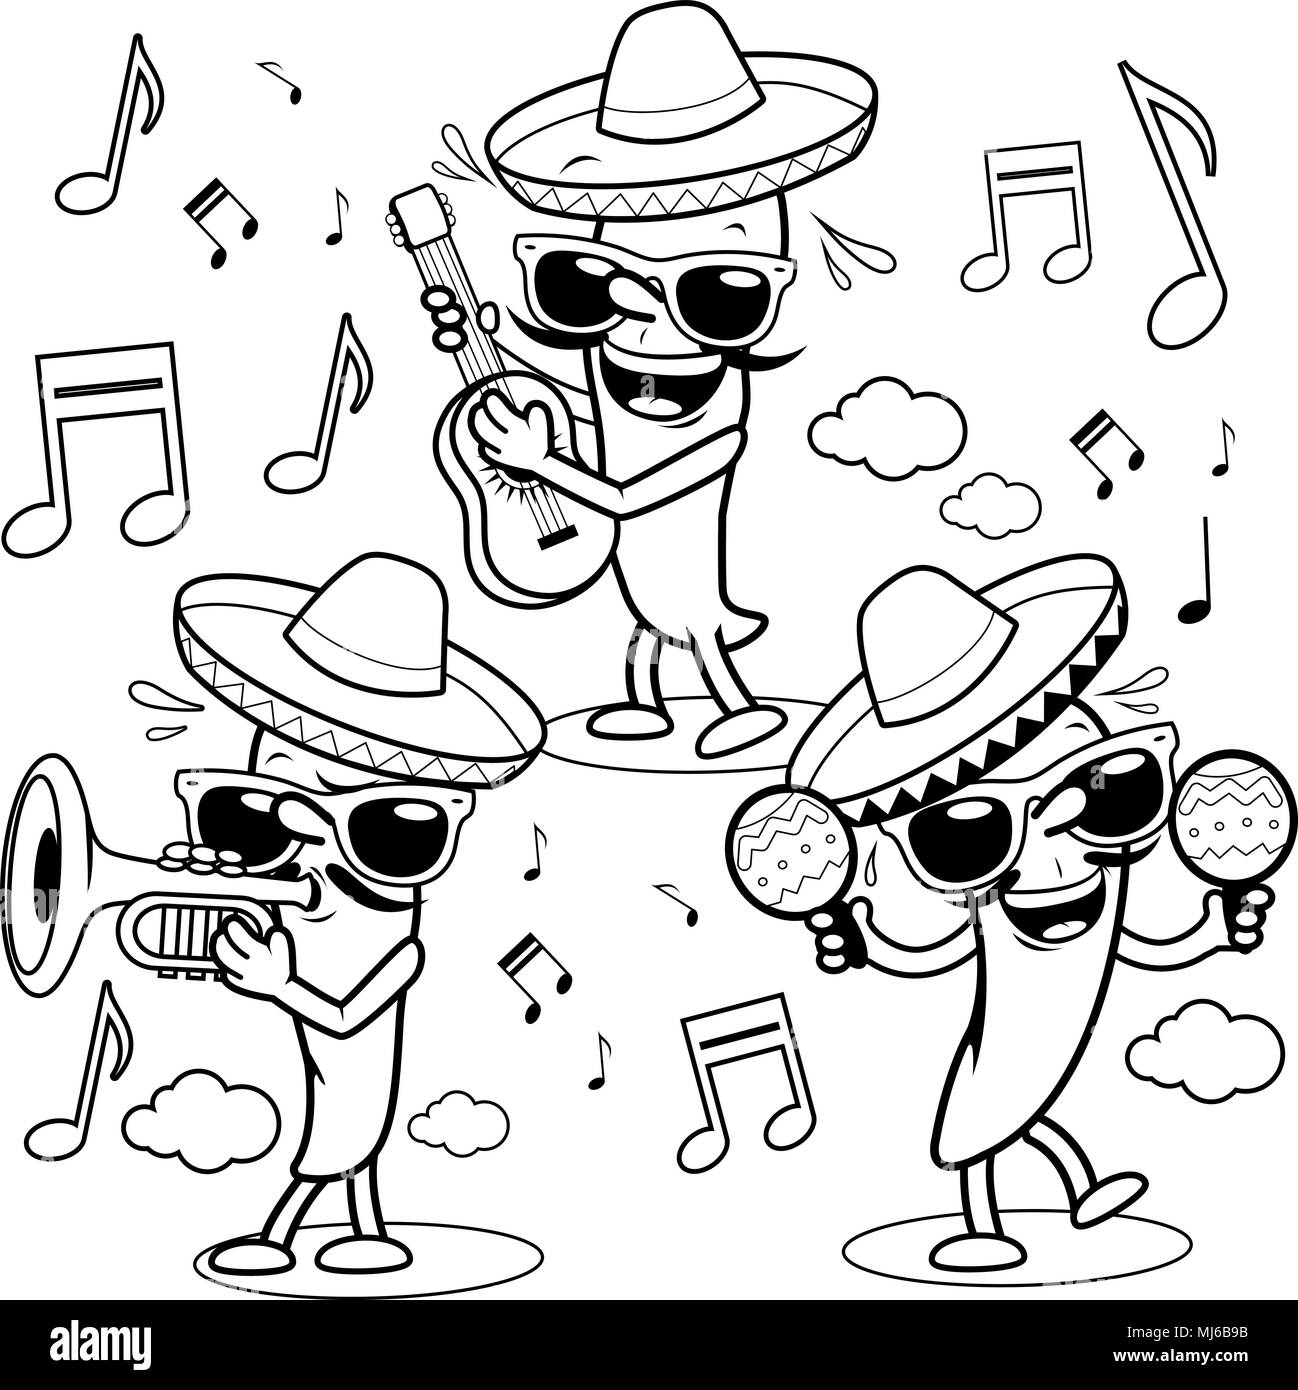 Cartoon mariachi peppers wearing sombreros and playing music. Black and white coloring page illustration Stock Vector